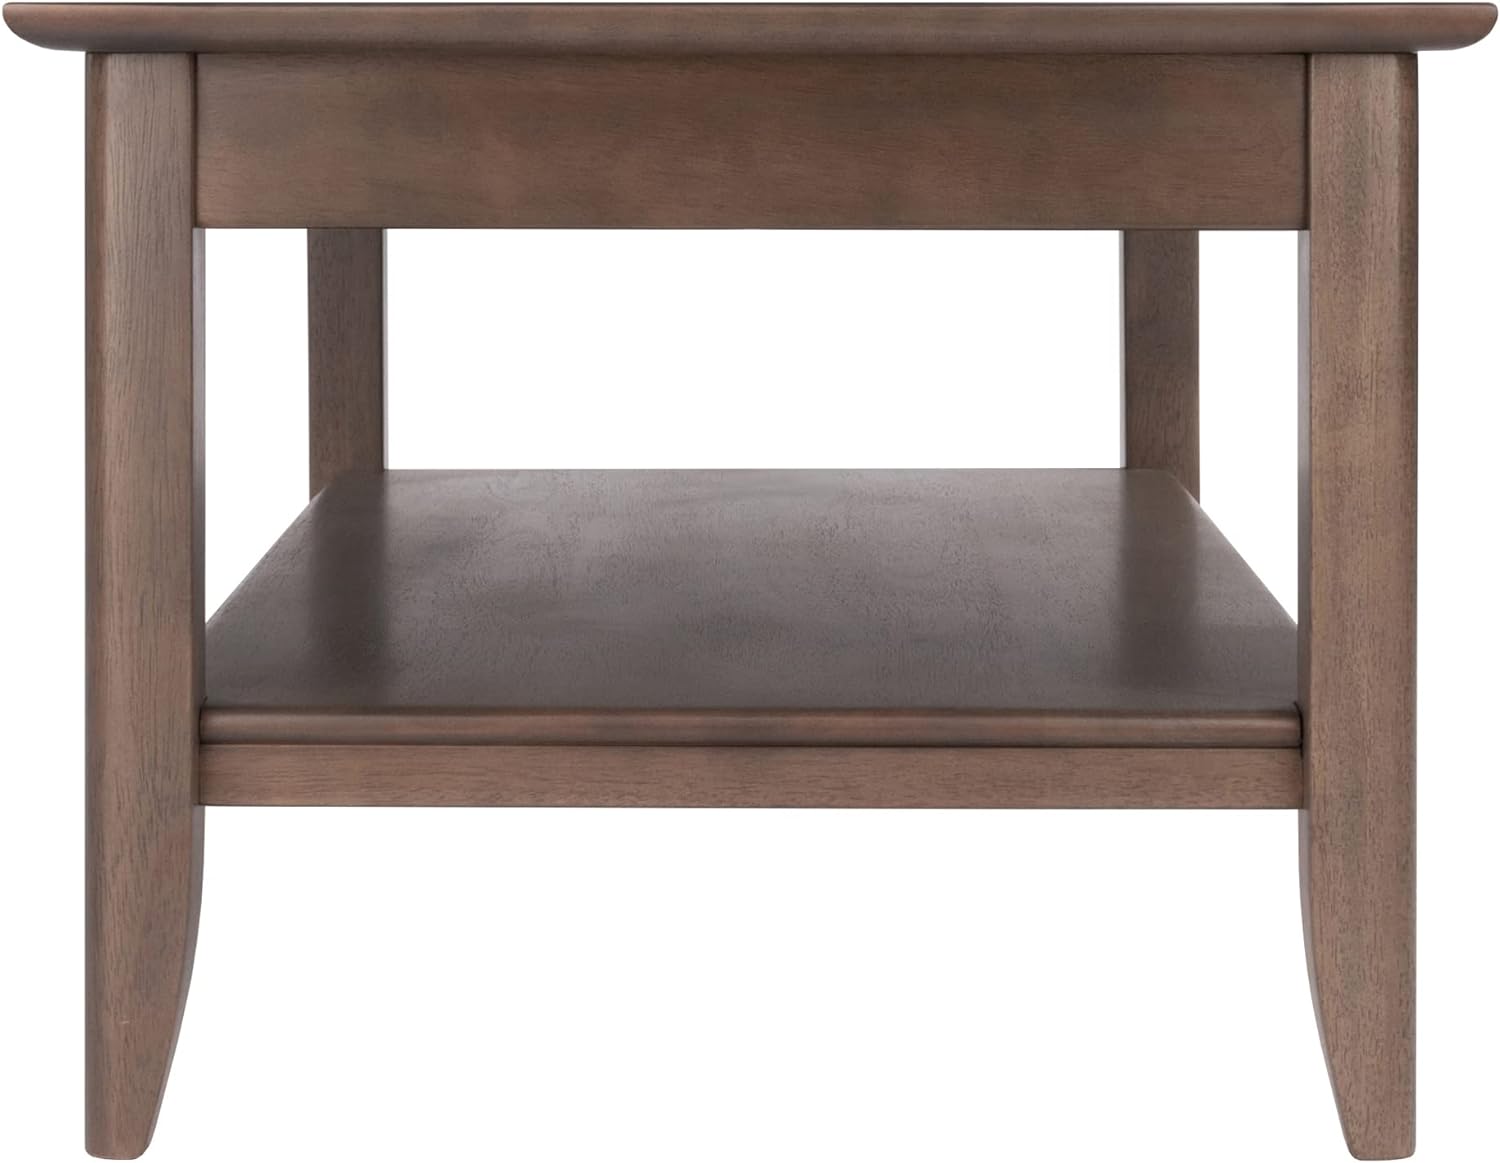 Winsome Wood Santino Coffee Table, 40 W, Oyster Gray